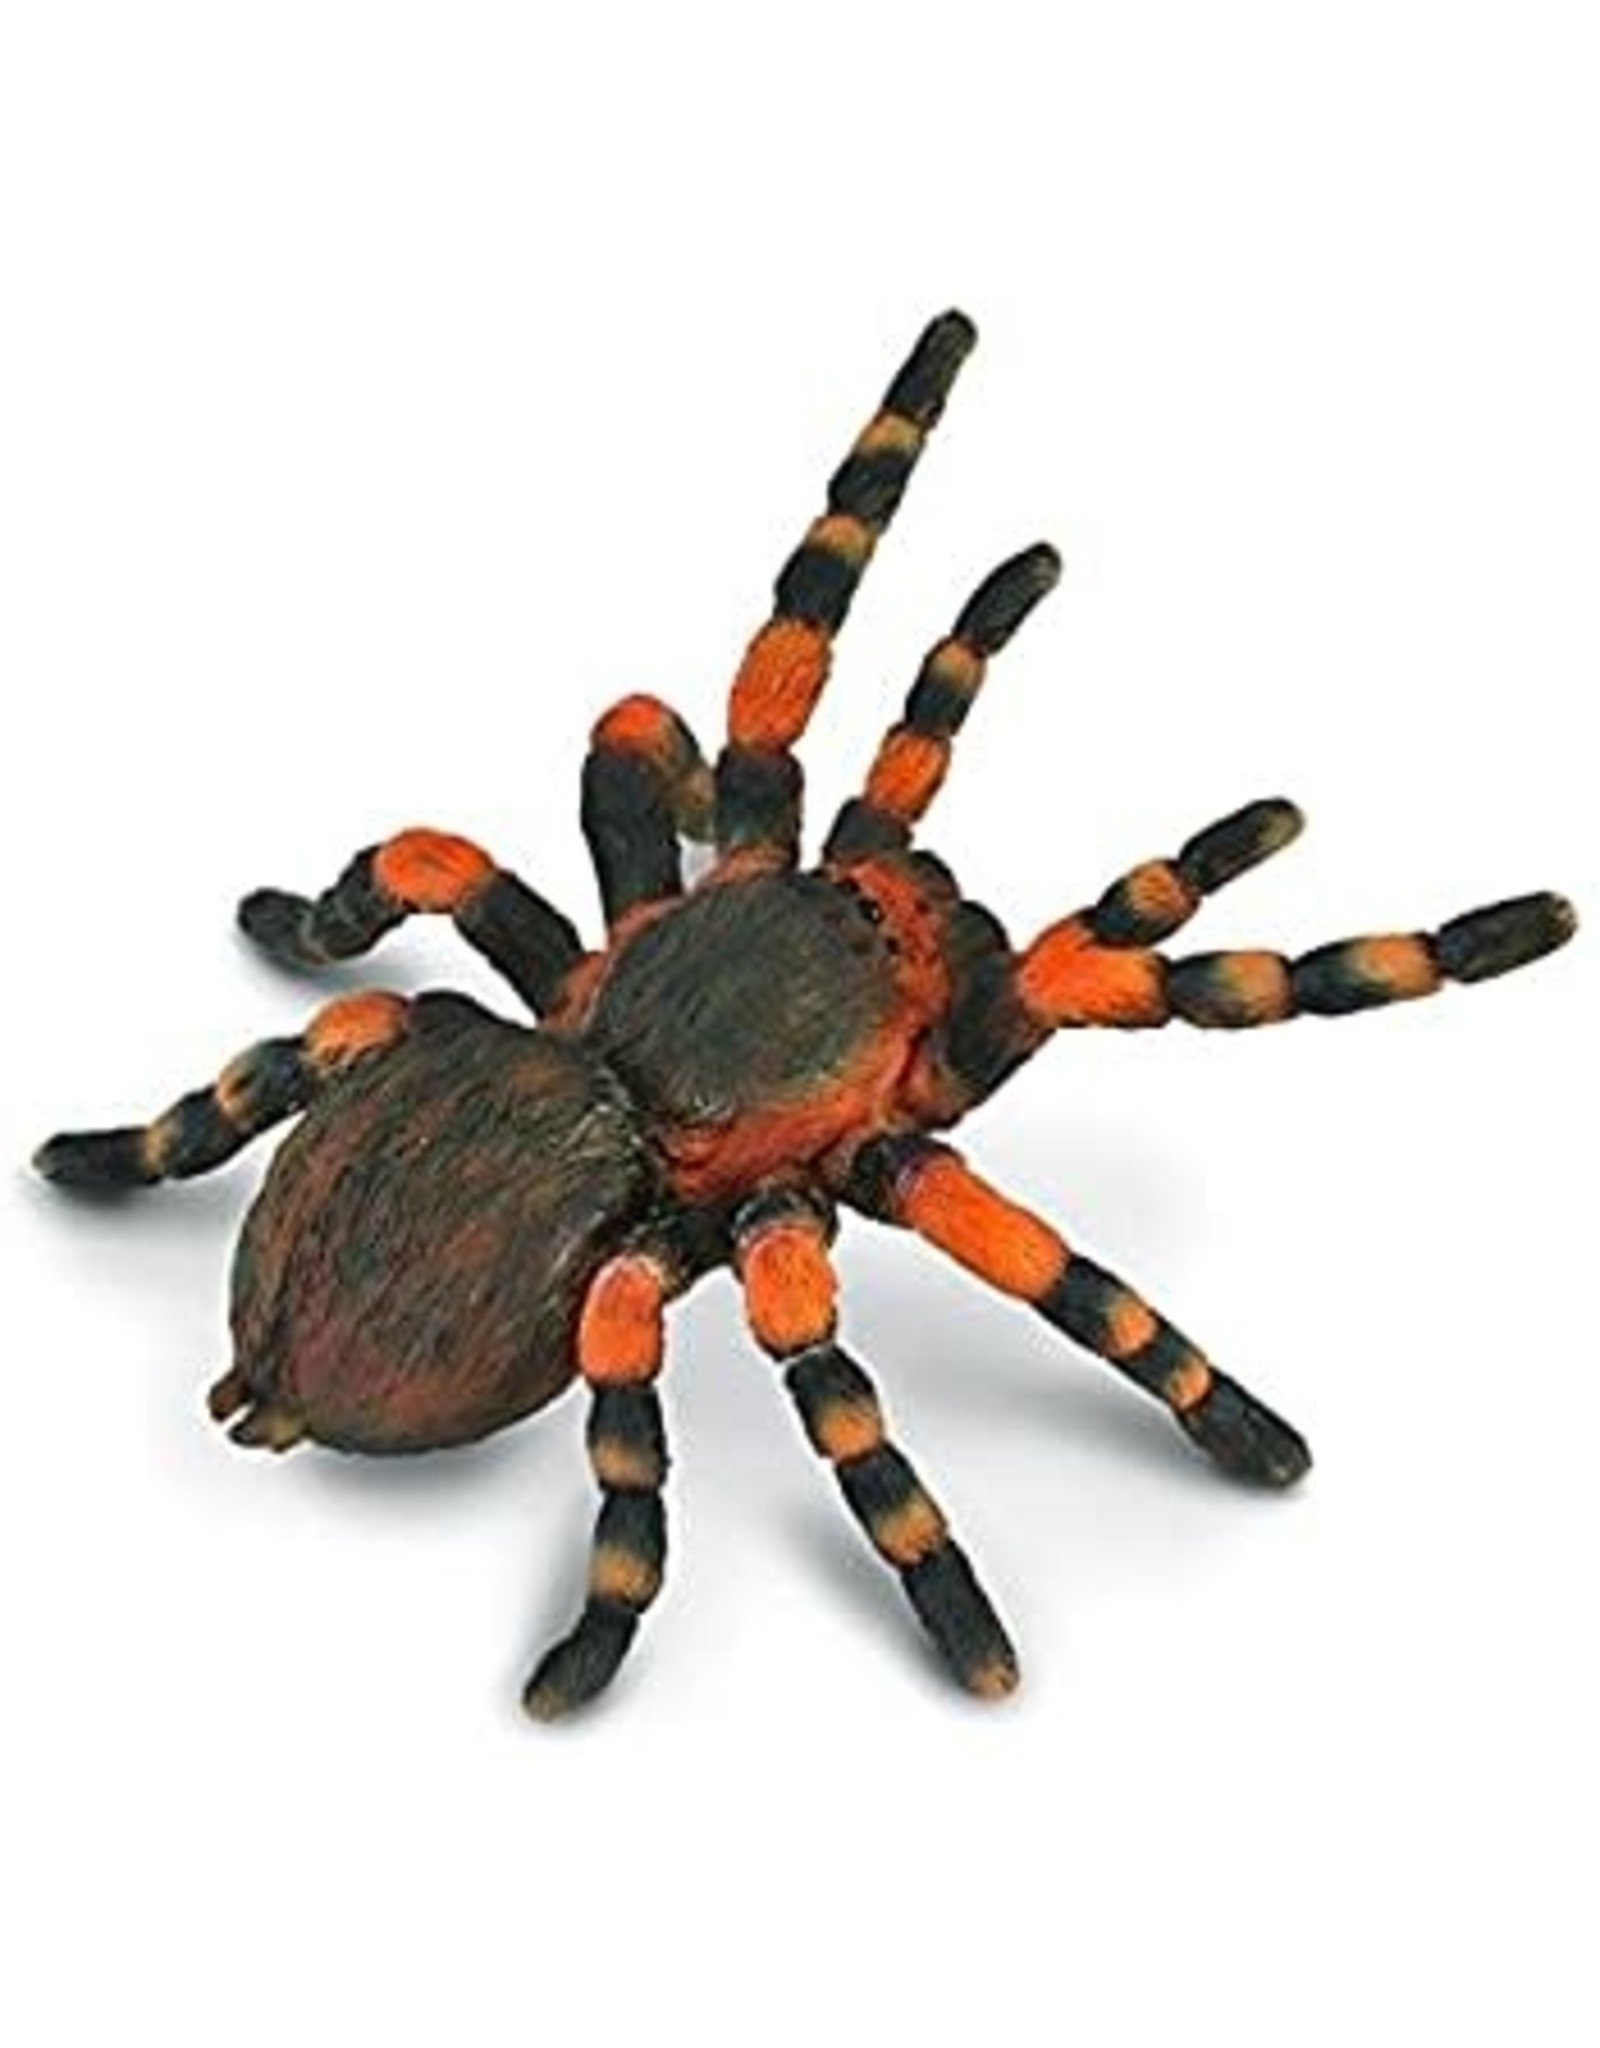 CollectA Insect: Mexican Redknee Tarantula